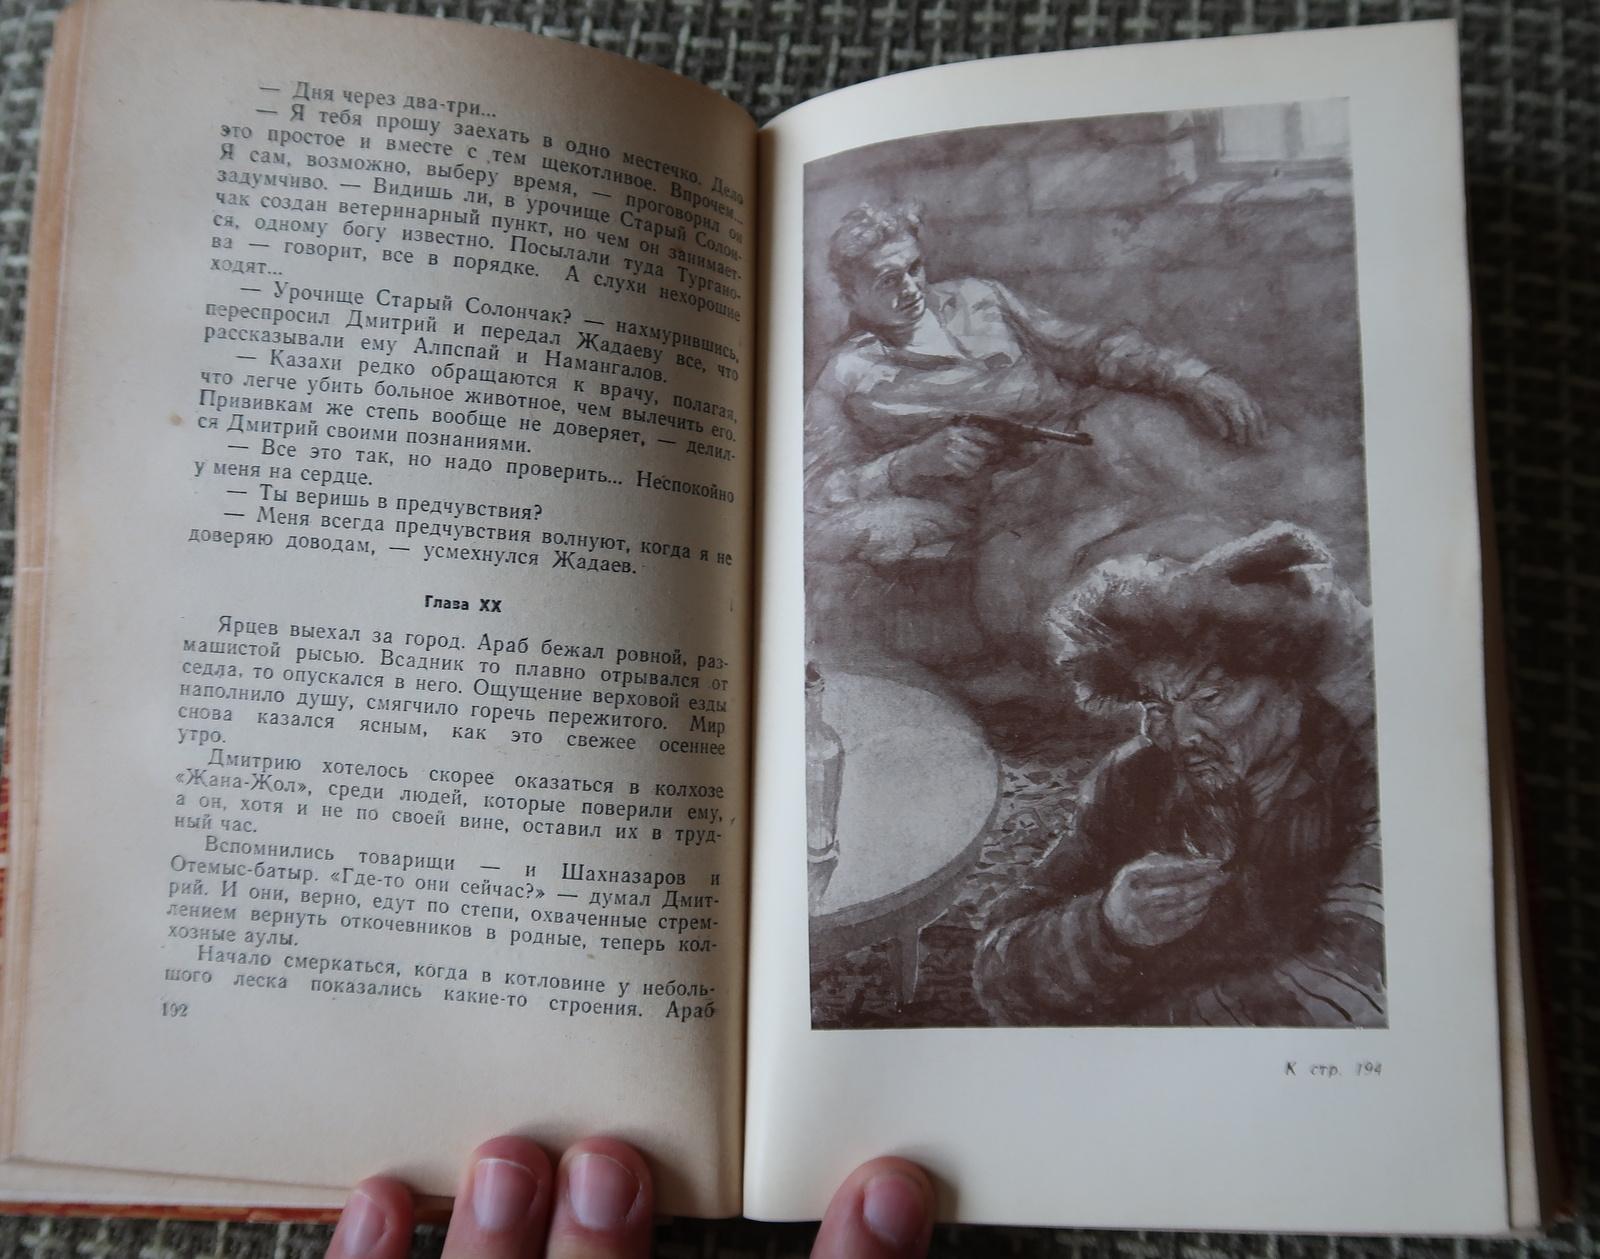 Vintage USSR Book: 'Nomads' by K. Kripichny - A Rare Gem from 1963, 1J126 For Sale 3